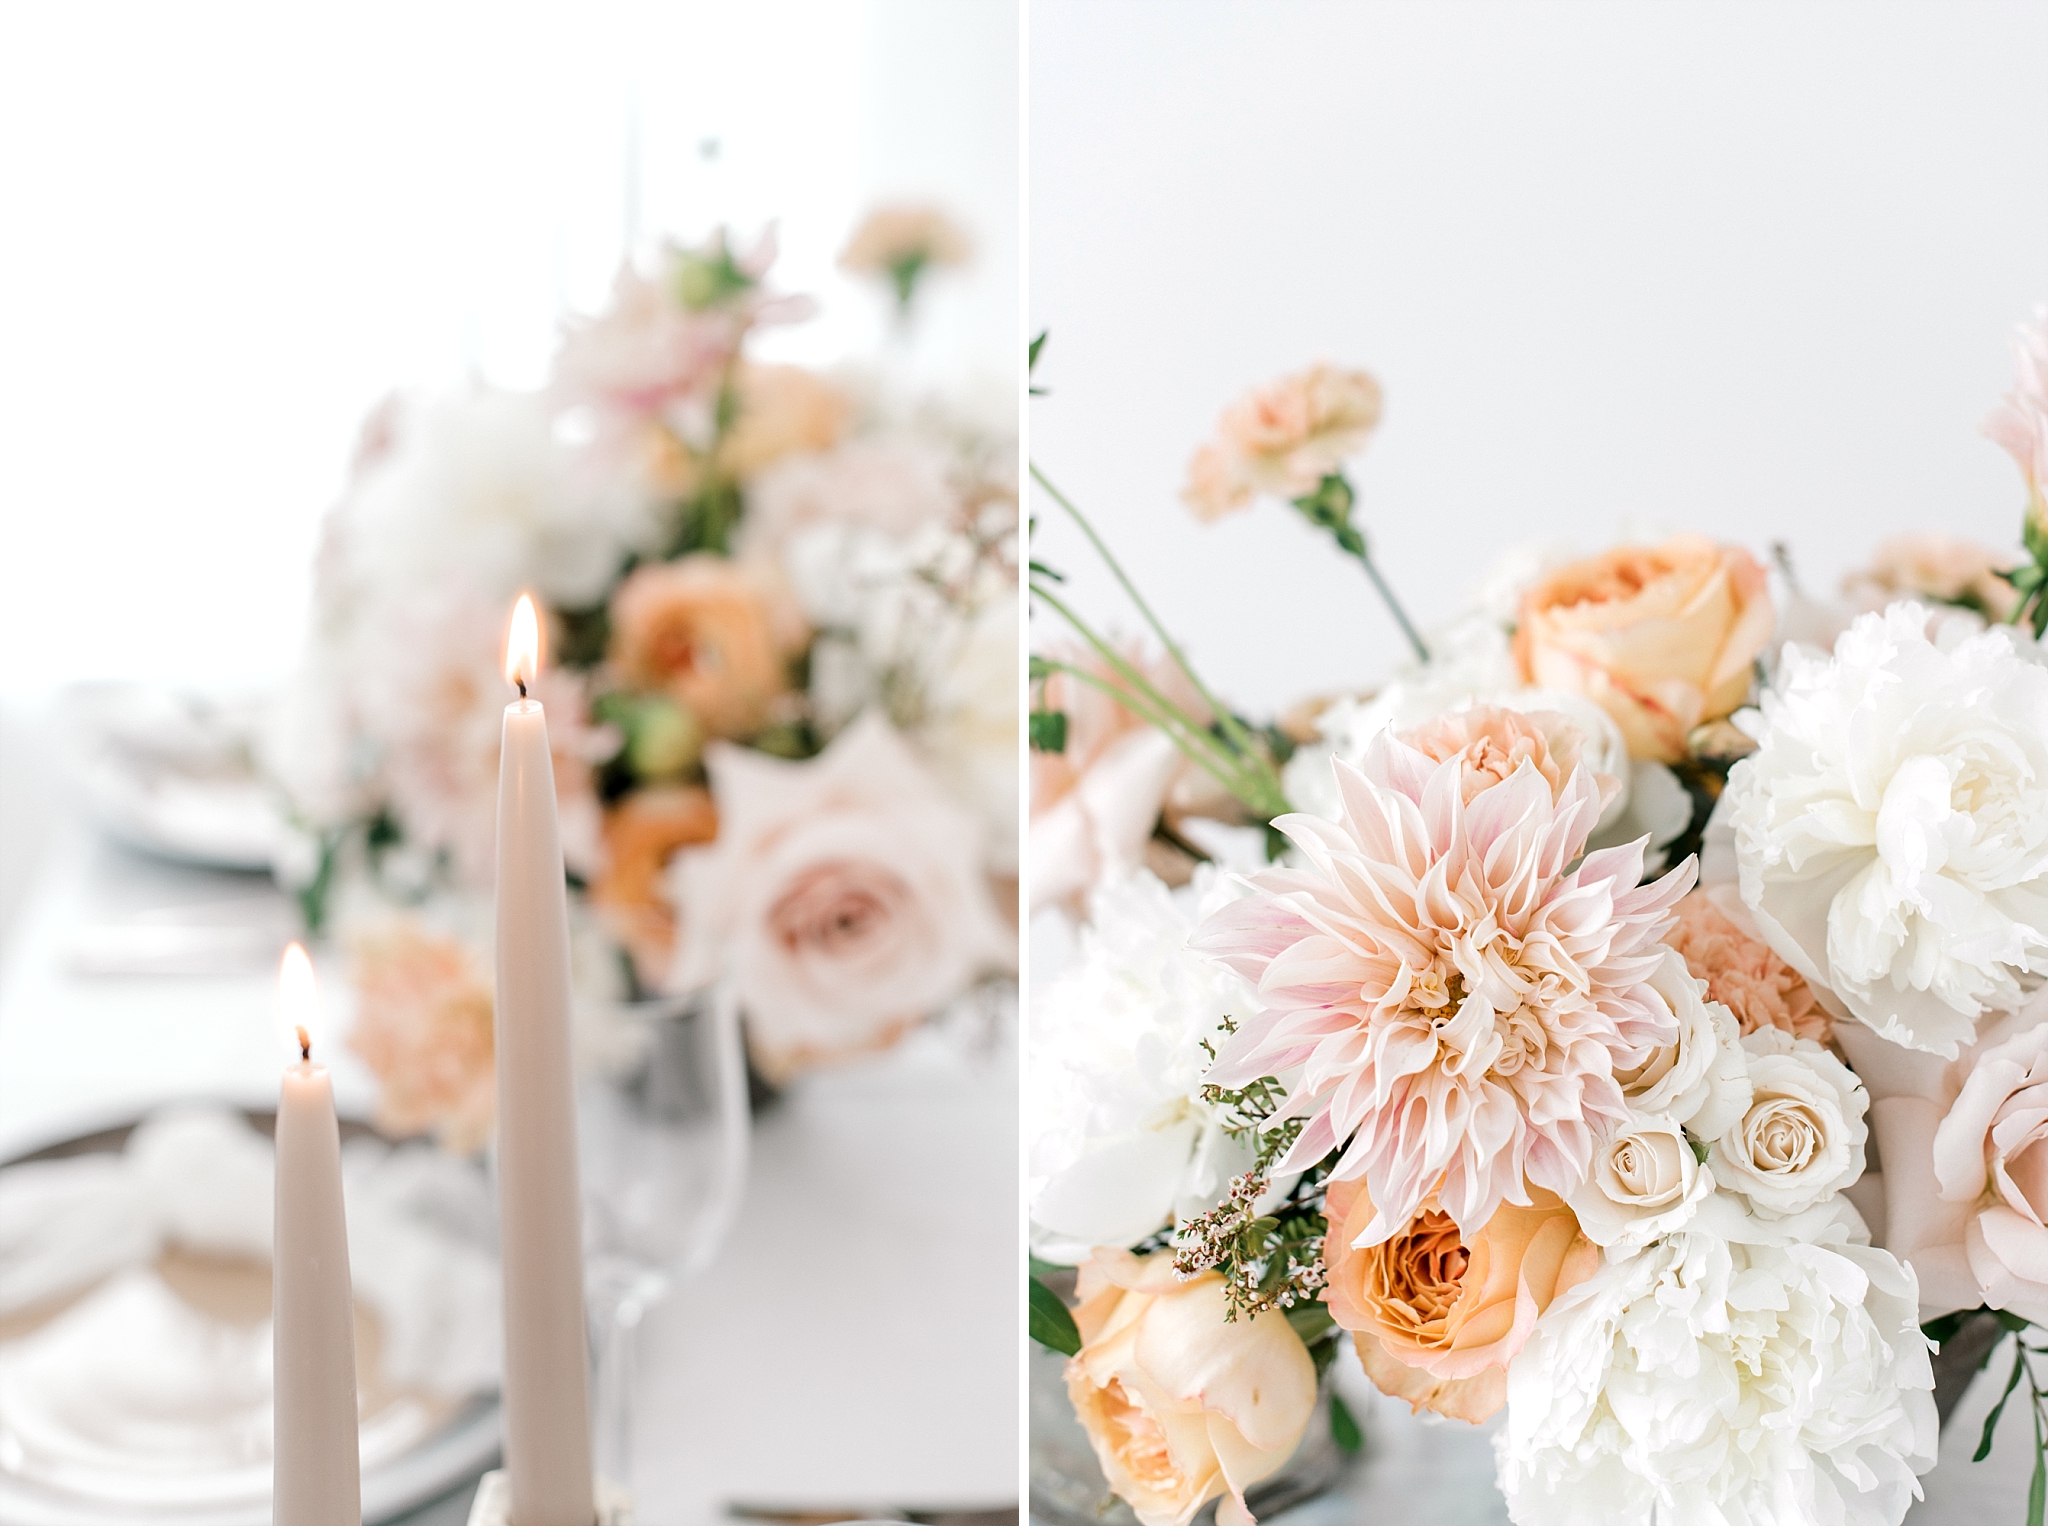 Floral centerpieces and candles